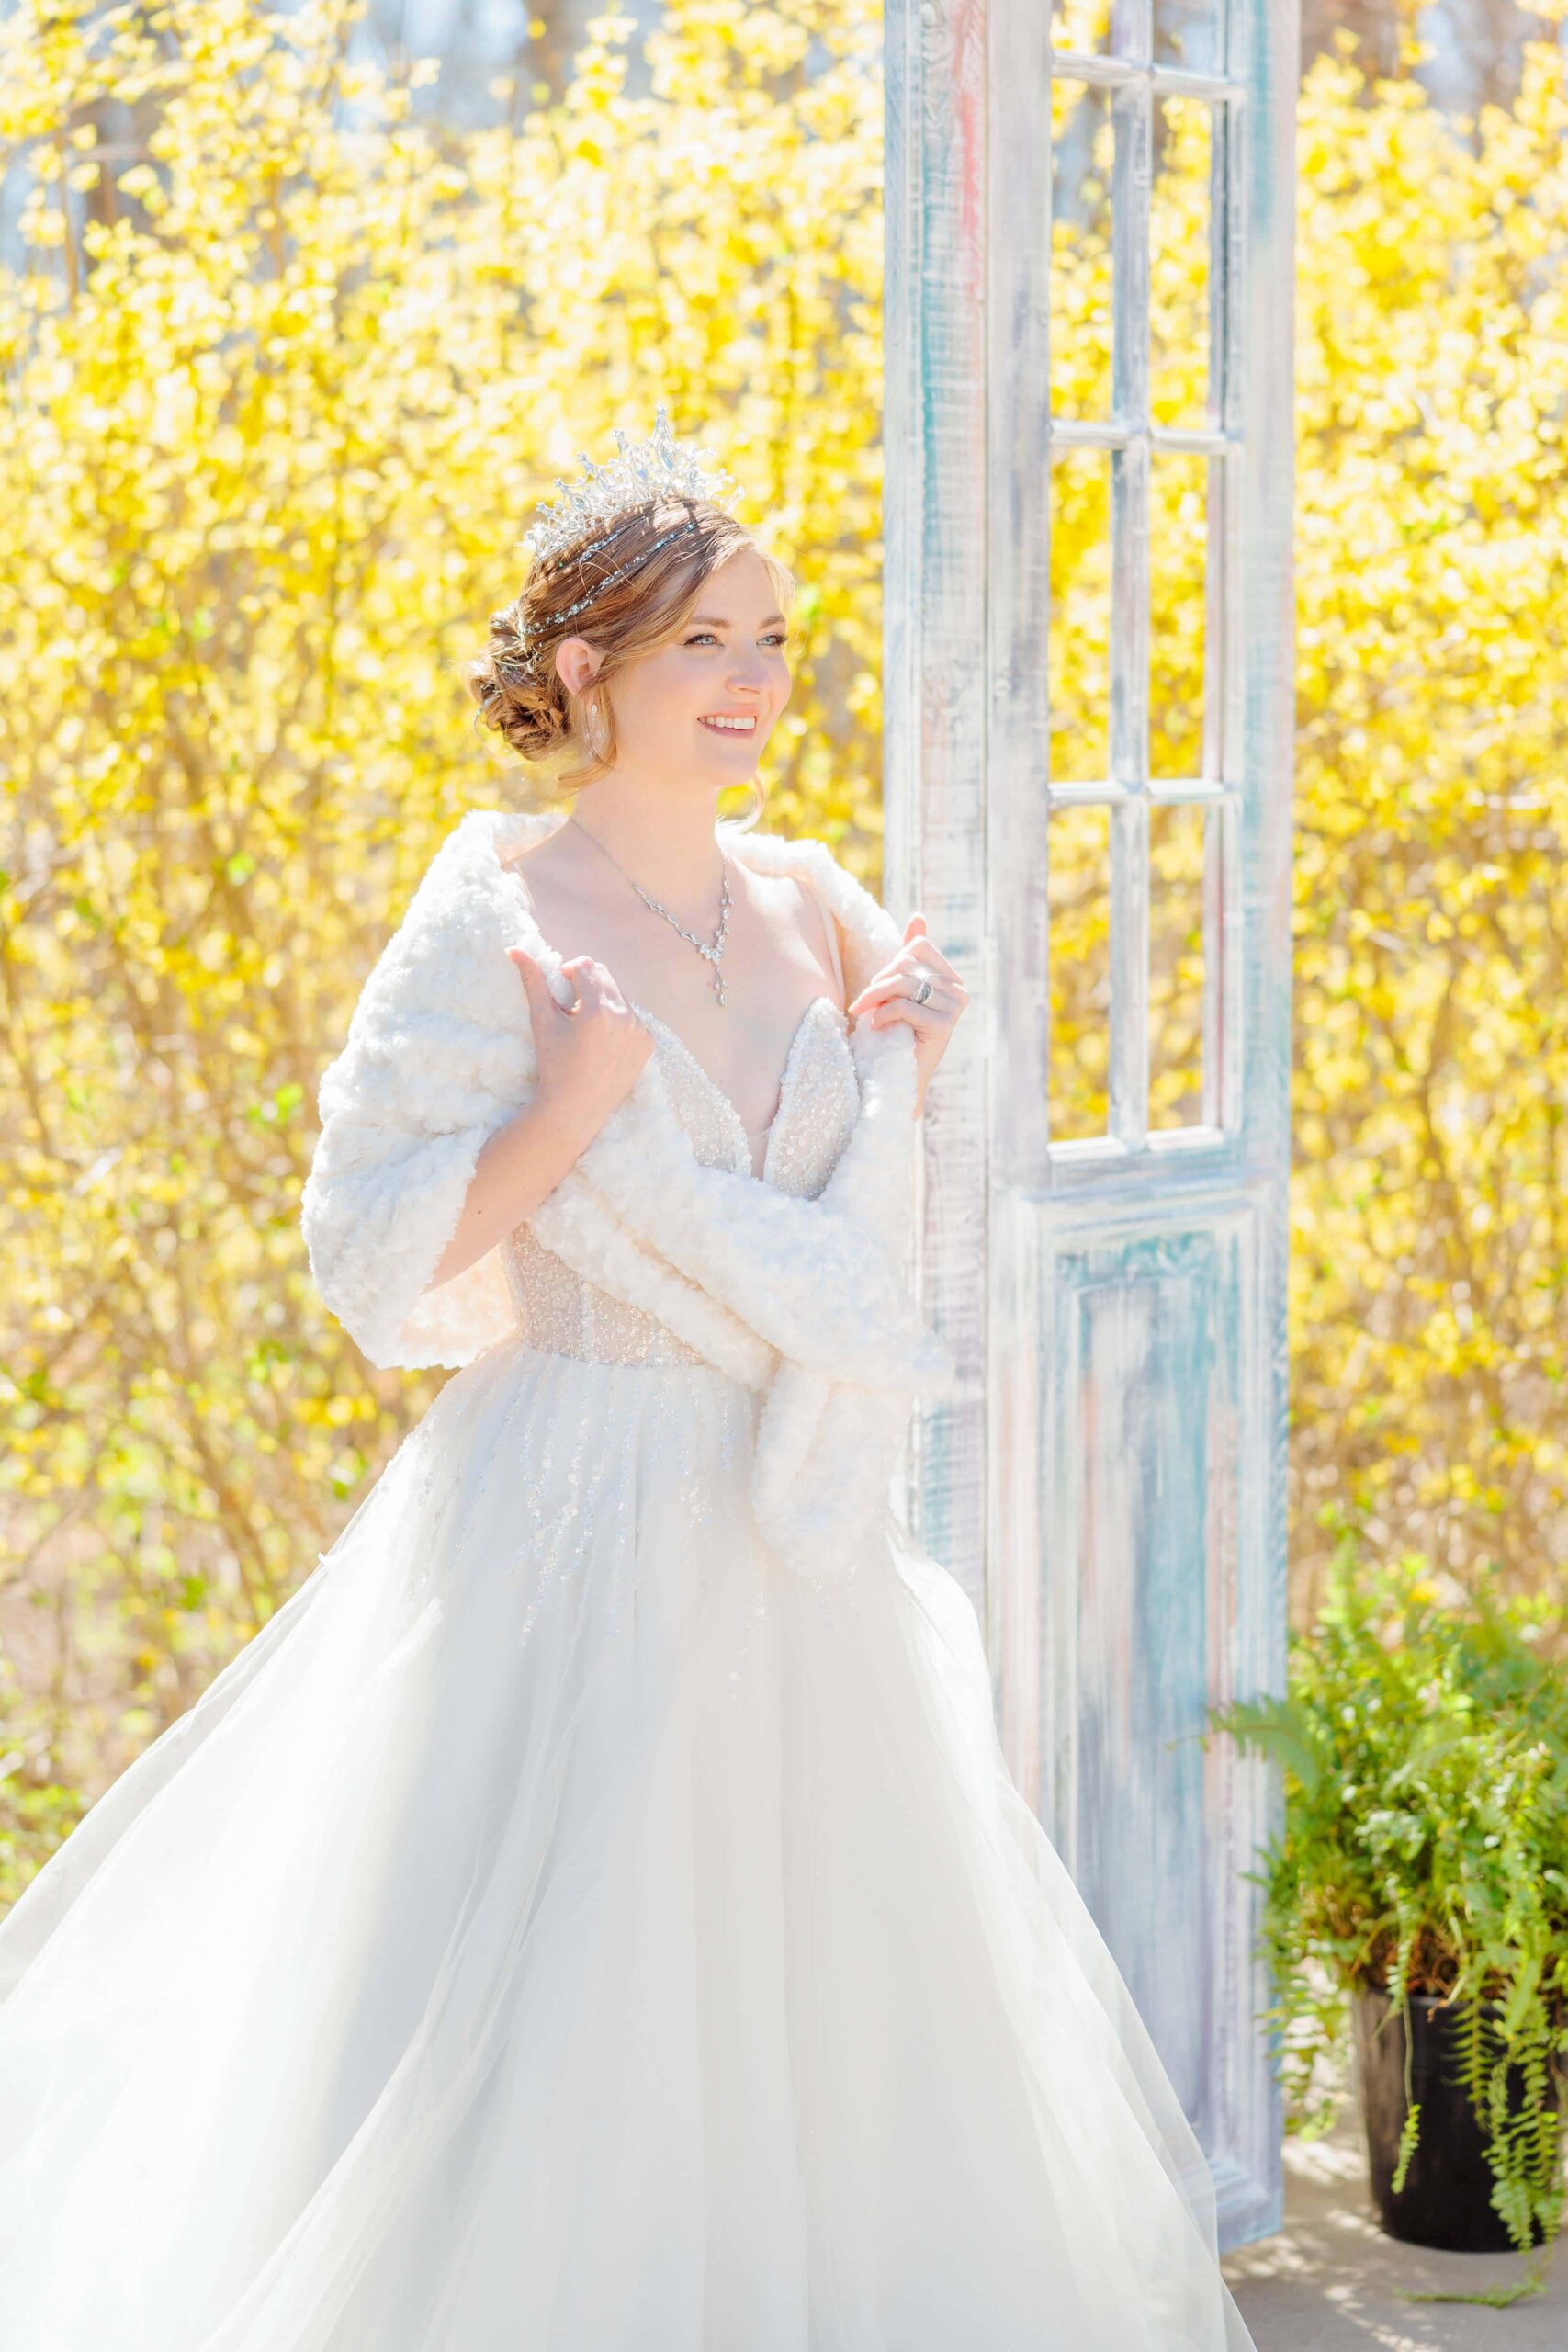 The bride wears a fuzzy white shawl in front of the yellow trees to keep warm for her winter wonderland wedding.